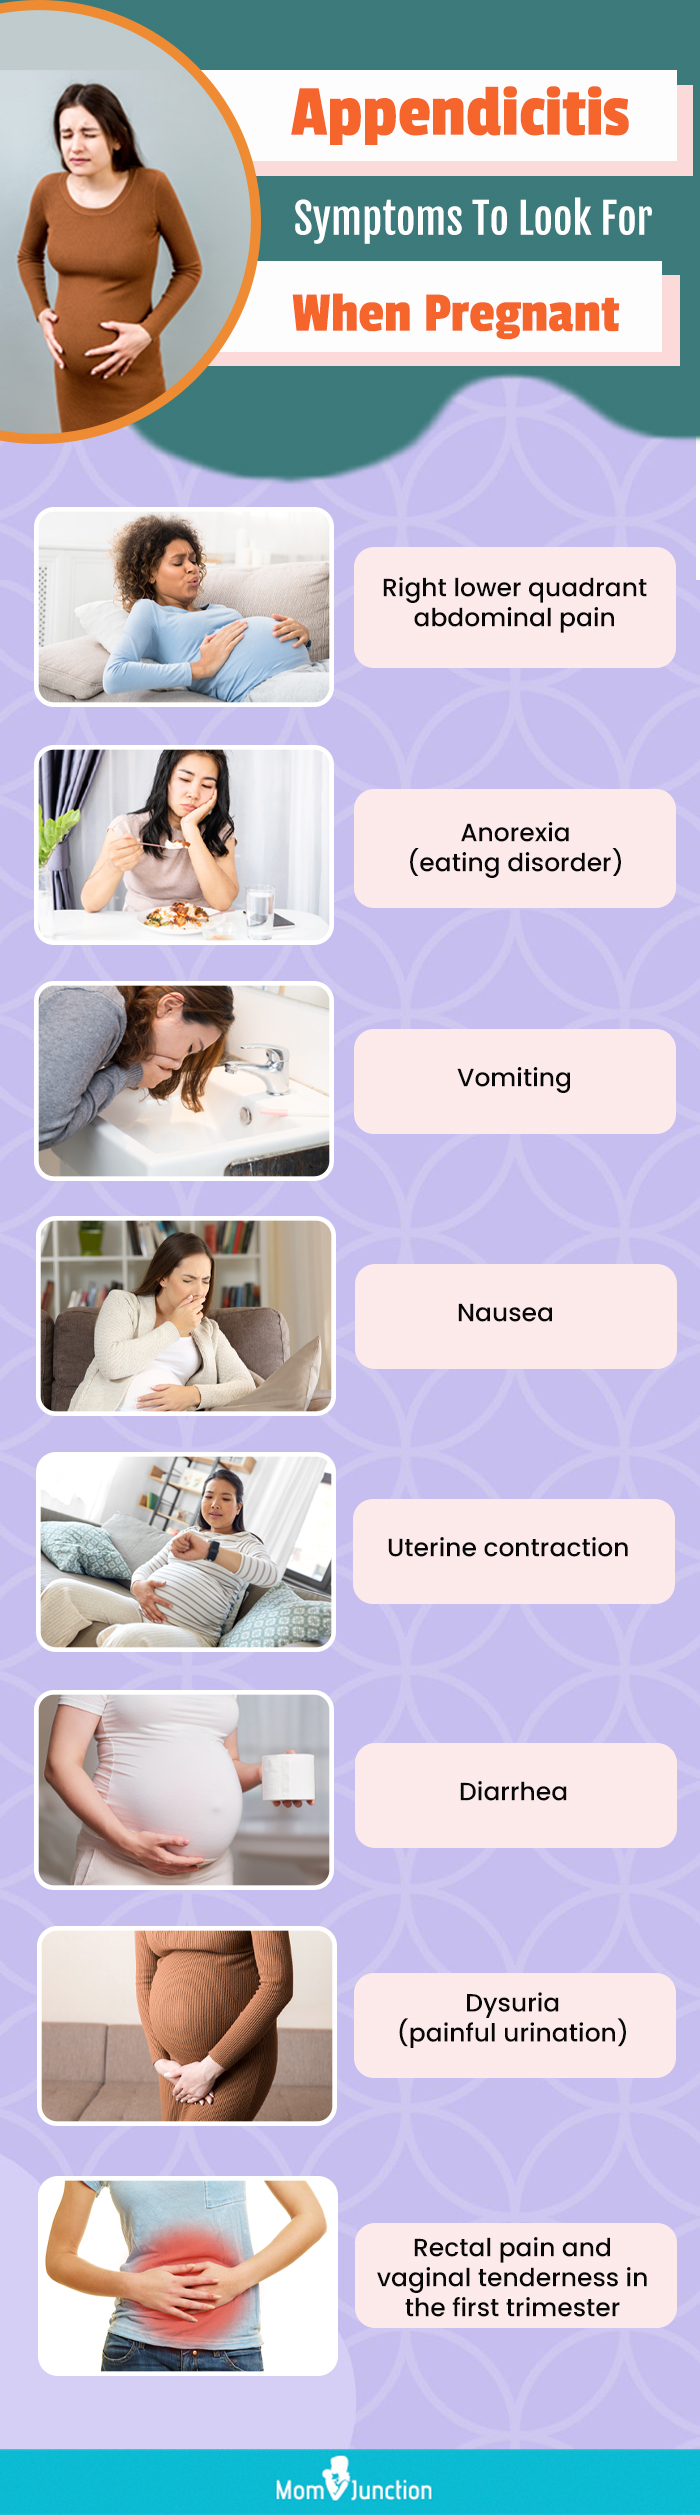 appendicitis symptoms to look for when pregnant (infographic)